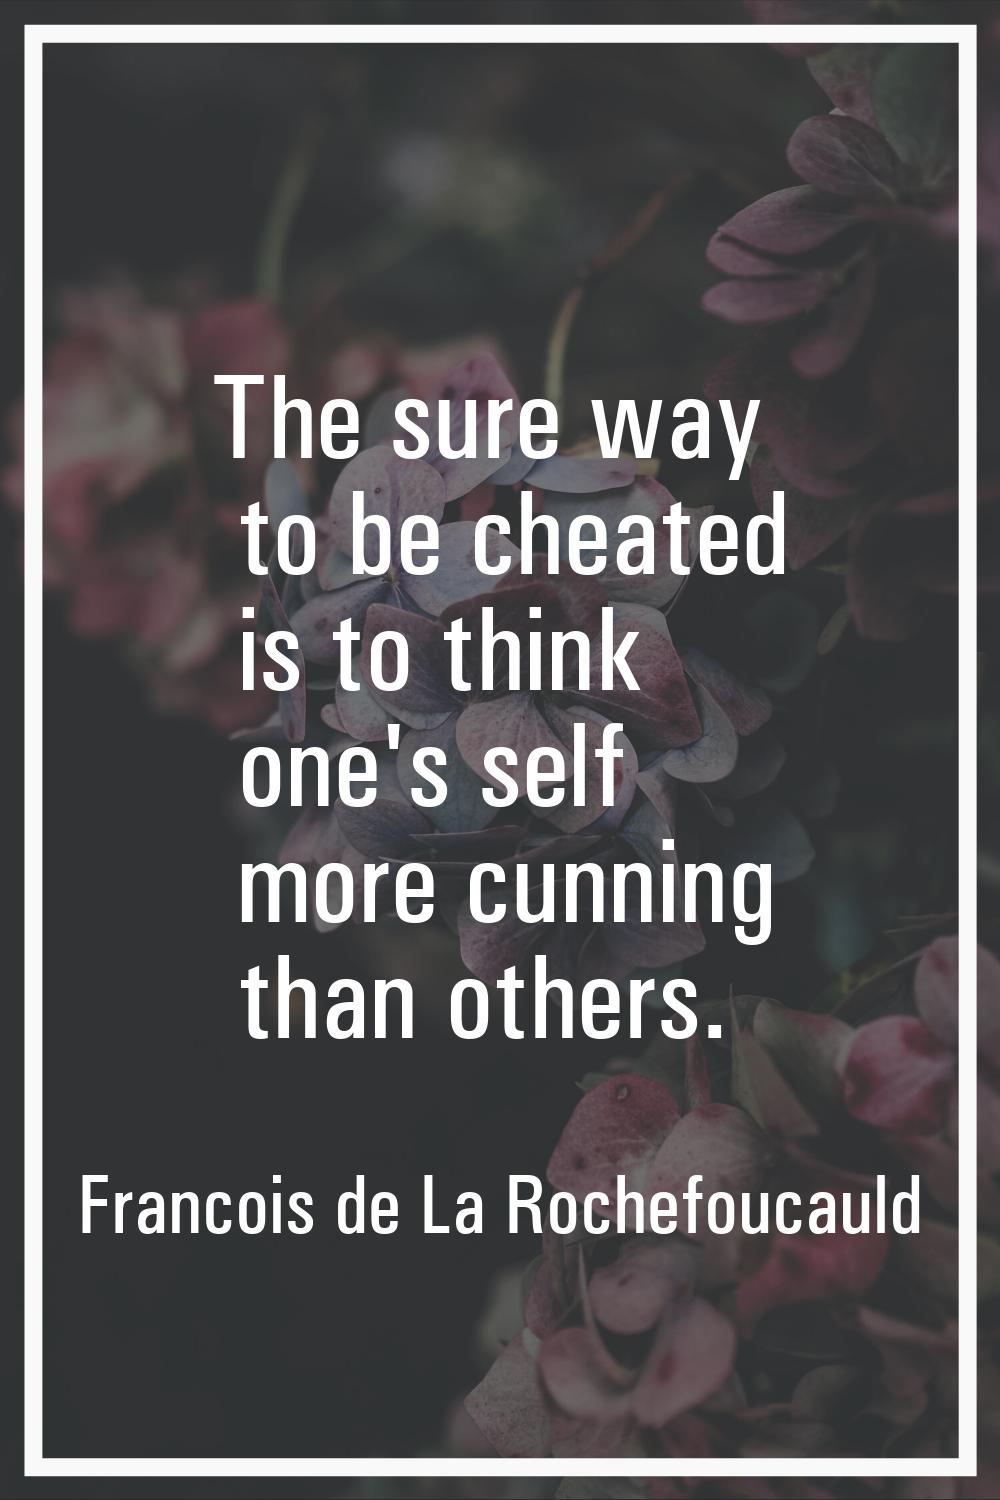 The sure way to be cheated is to think one's self more cunning than others.